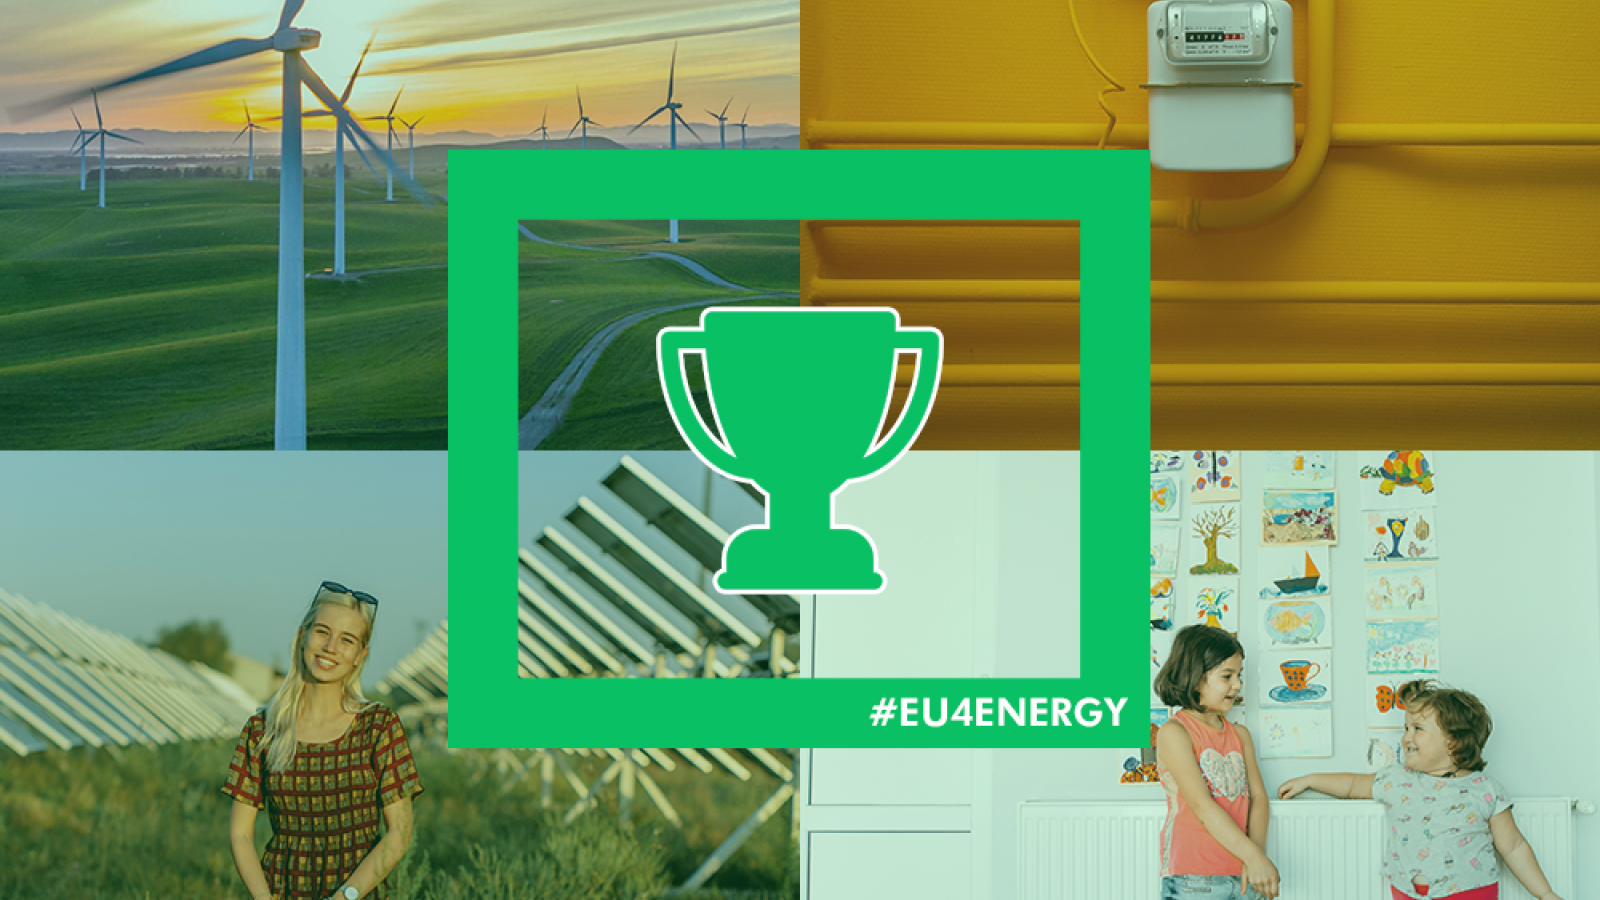 #EU4Energy competition: Test your knowledge and win a prize